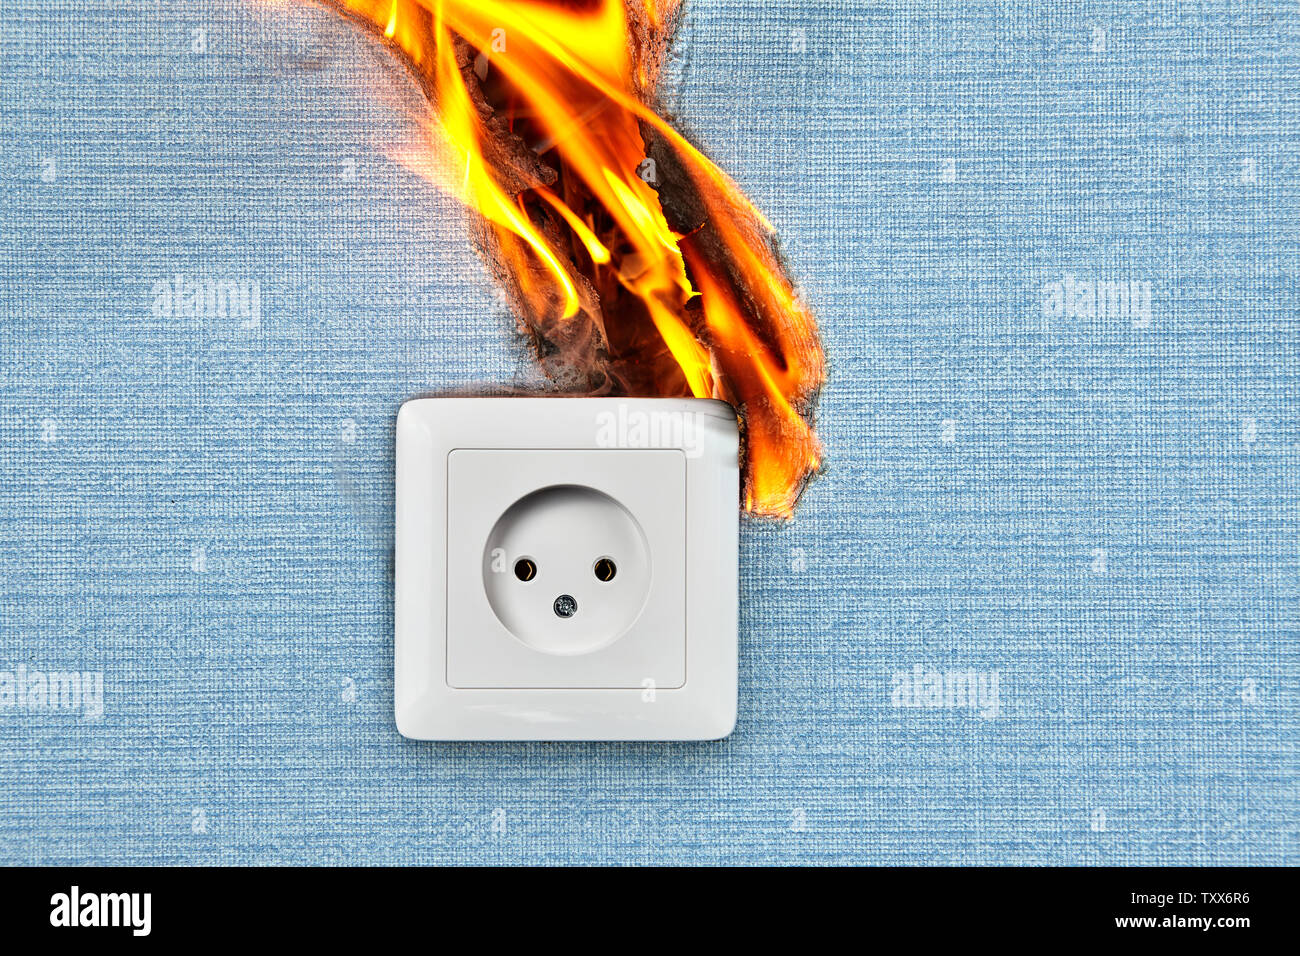 Bad electrical wiring blames in case of fire electric outlet. Faulty wiring causes fires. Stock Photo